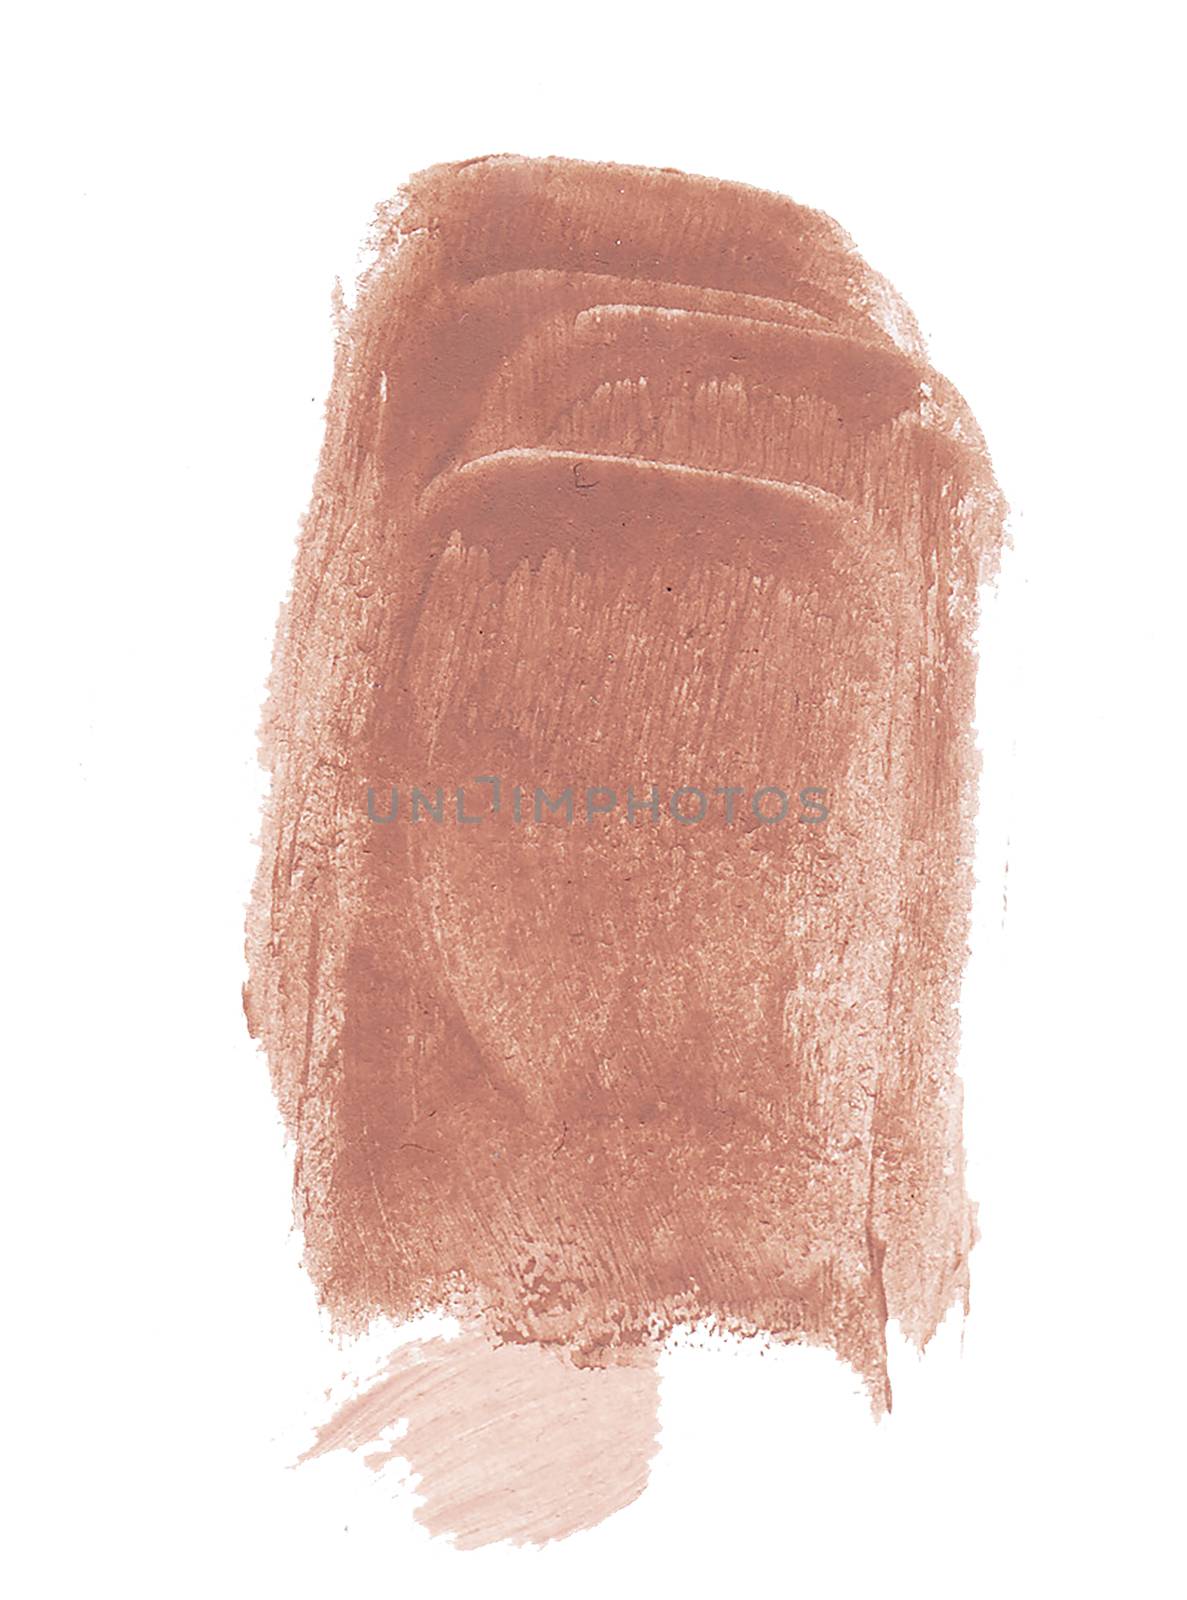 Foundation transparent smudge isolated on white background. Creamy texture makeup smudge illustration, brush stroke. For card, banner, poster design.